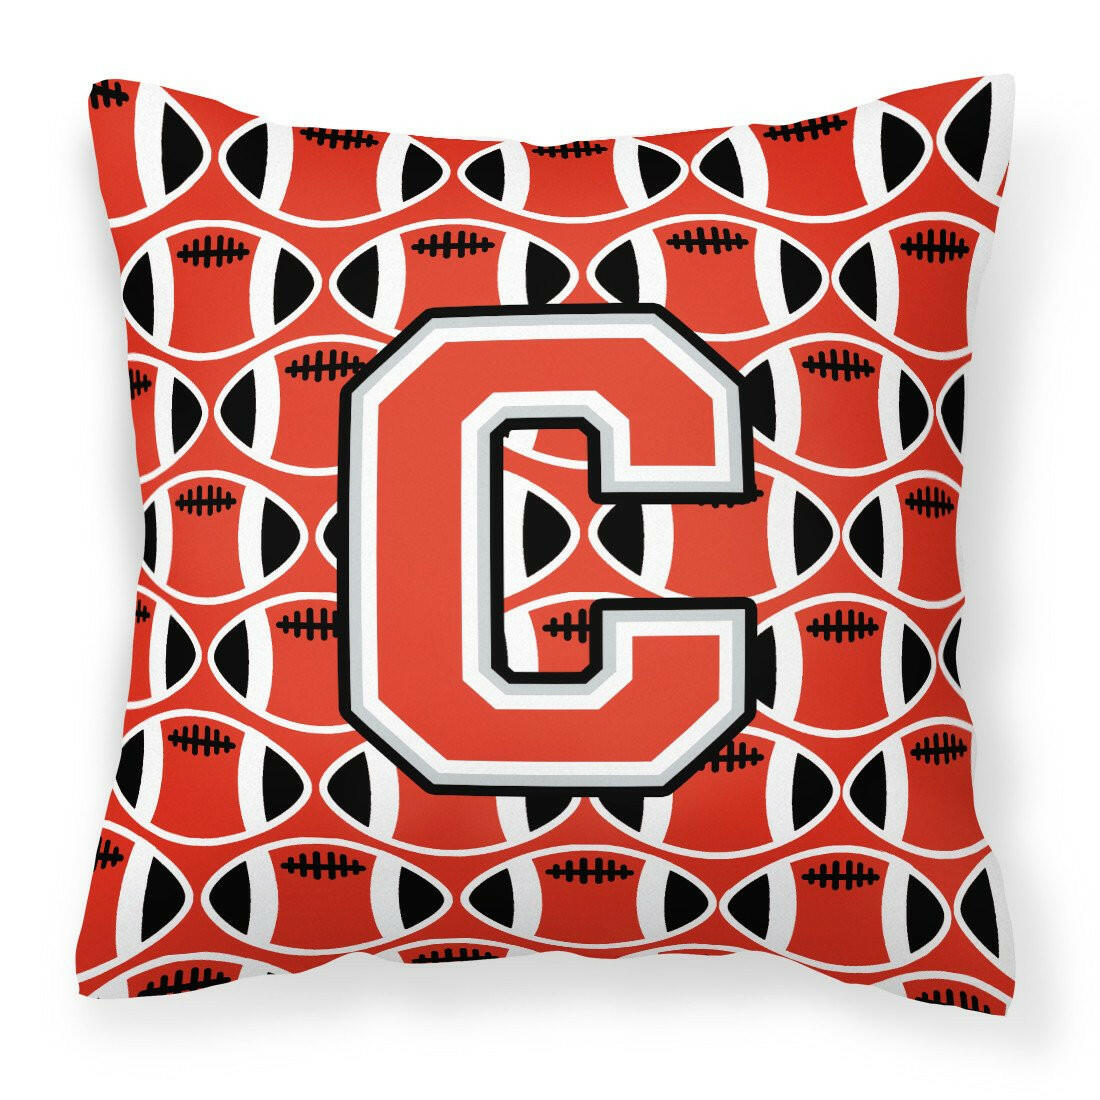 Letter C Football Scarlet and Grey Fabric Decorative Pillow CJ1067-CPW1414 by Caroline's Treasures